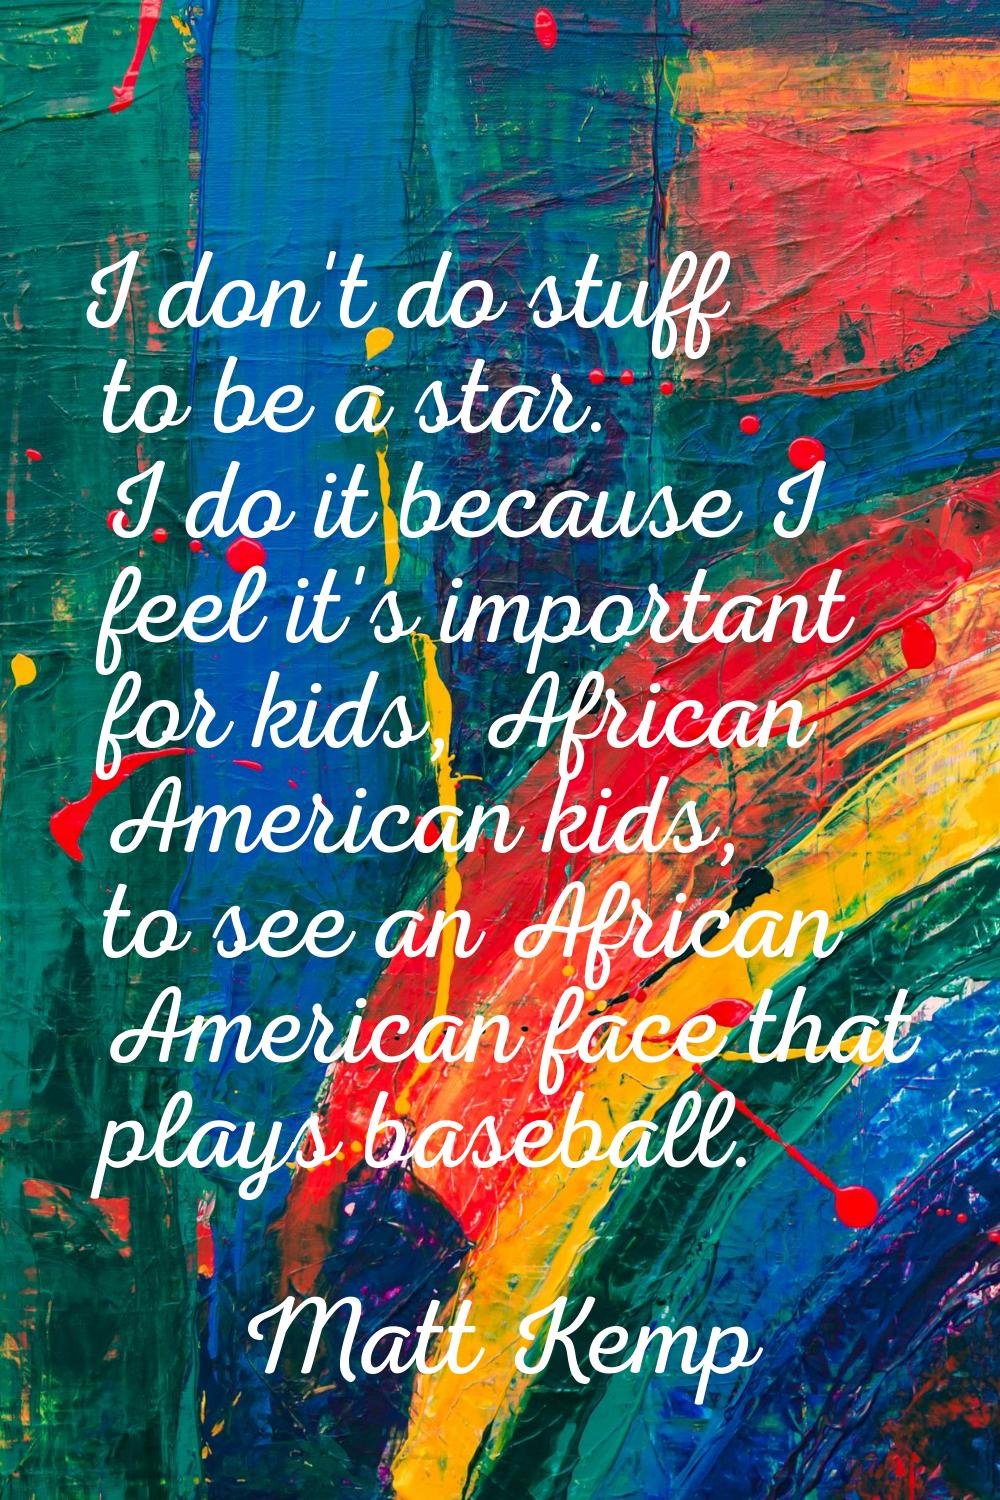 I don't do stuff to be a star. I do it because I feel it's important for kids, African American kid